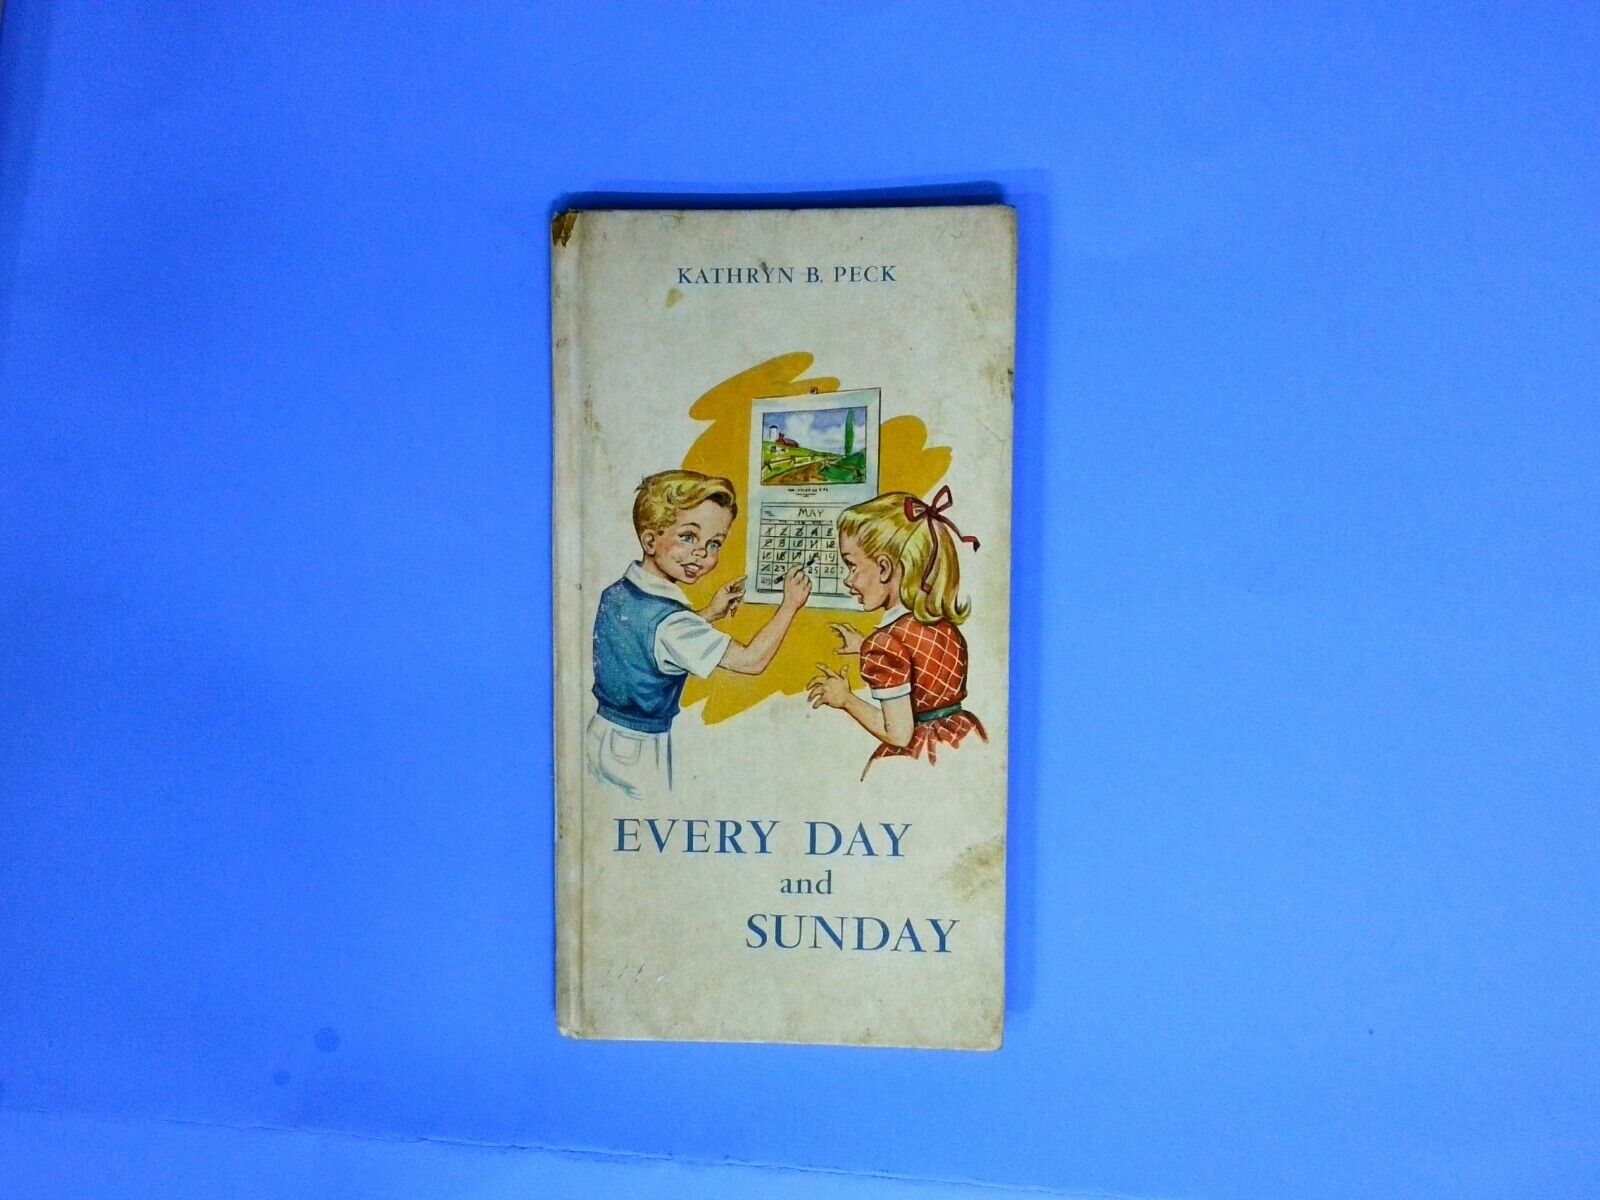 1959 Gospel Trumpet Children's Book: Every Day and Sunday by Kathryn Peck